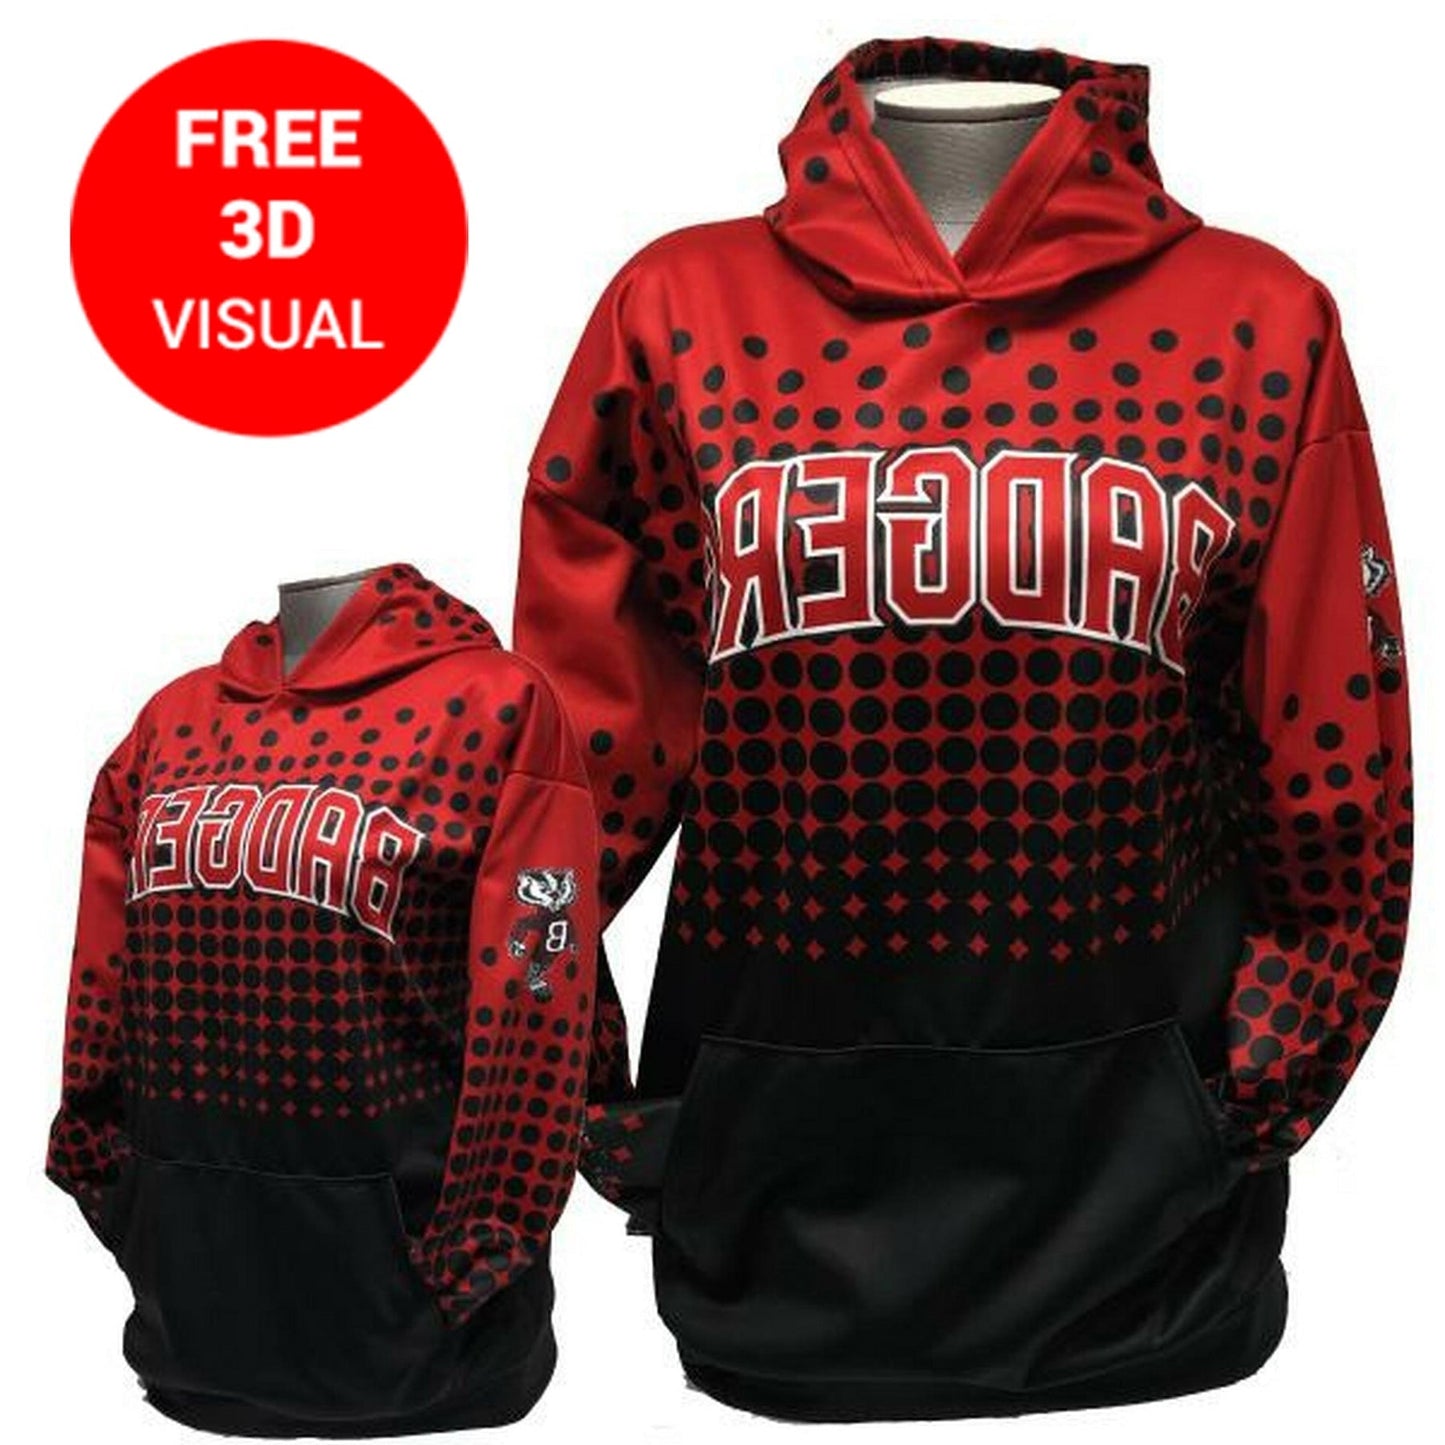 Sublimation 100% Polyester Sweatshirt Maroon Leopard Sublimation Hoodie Ready to Ship Send RTS Team Sublimation Fall New Maroon Sublimation